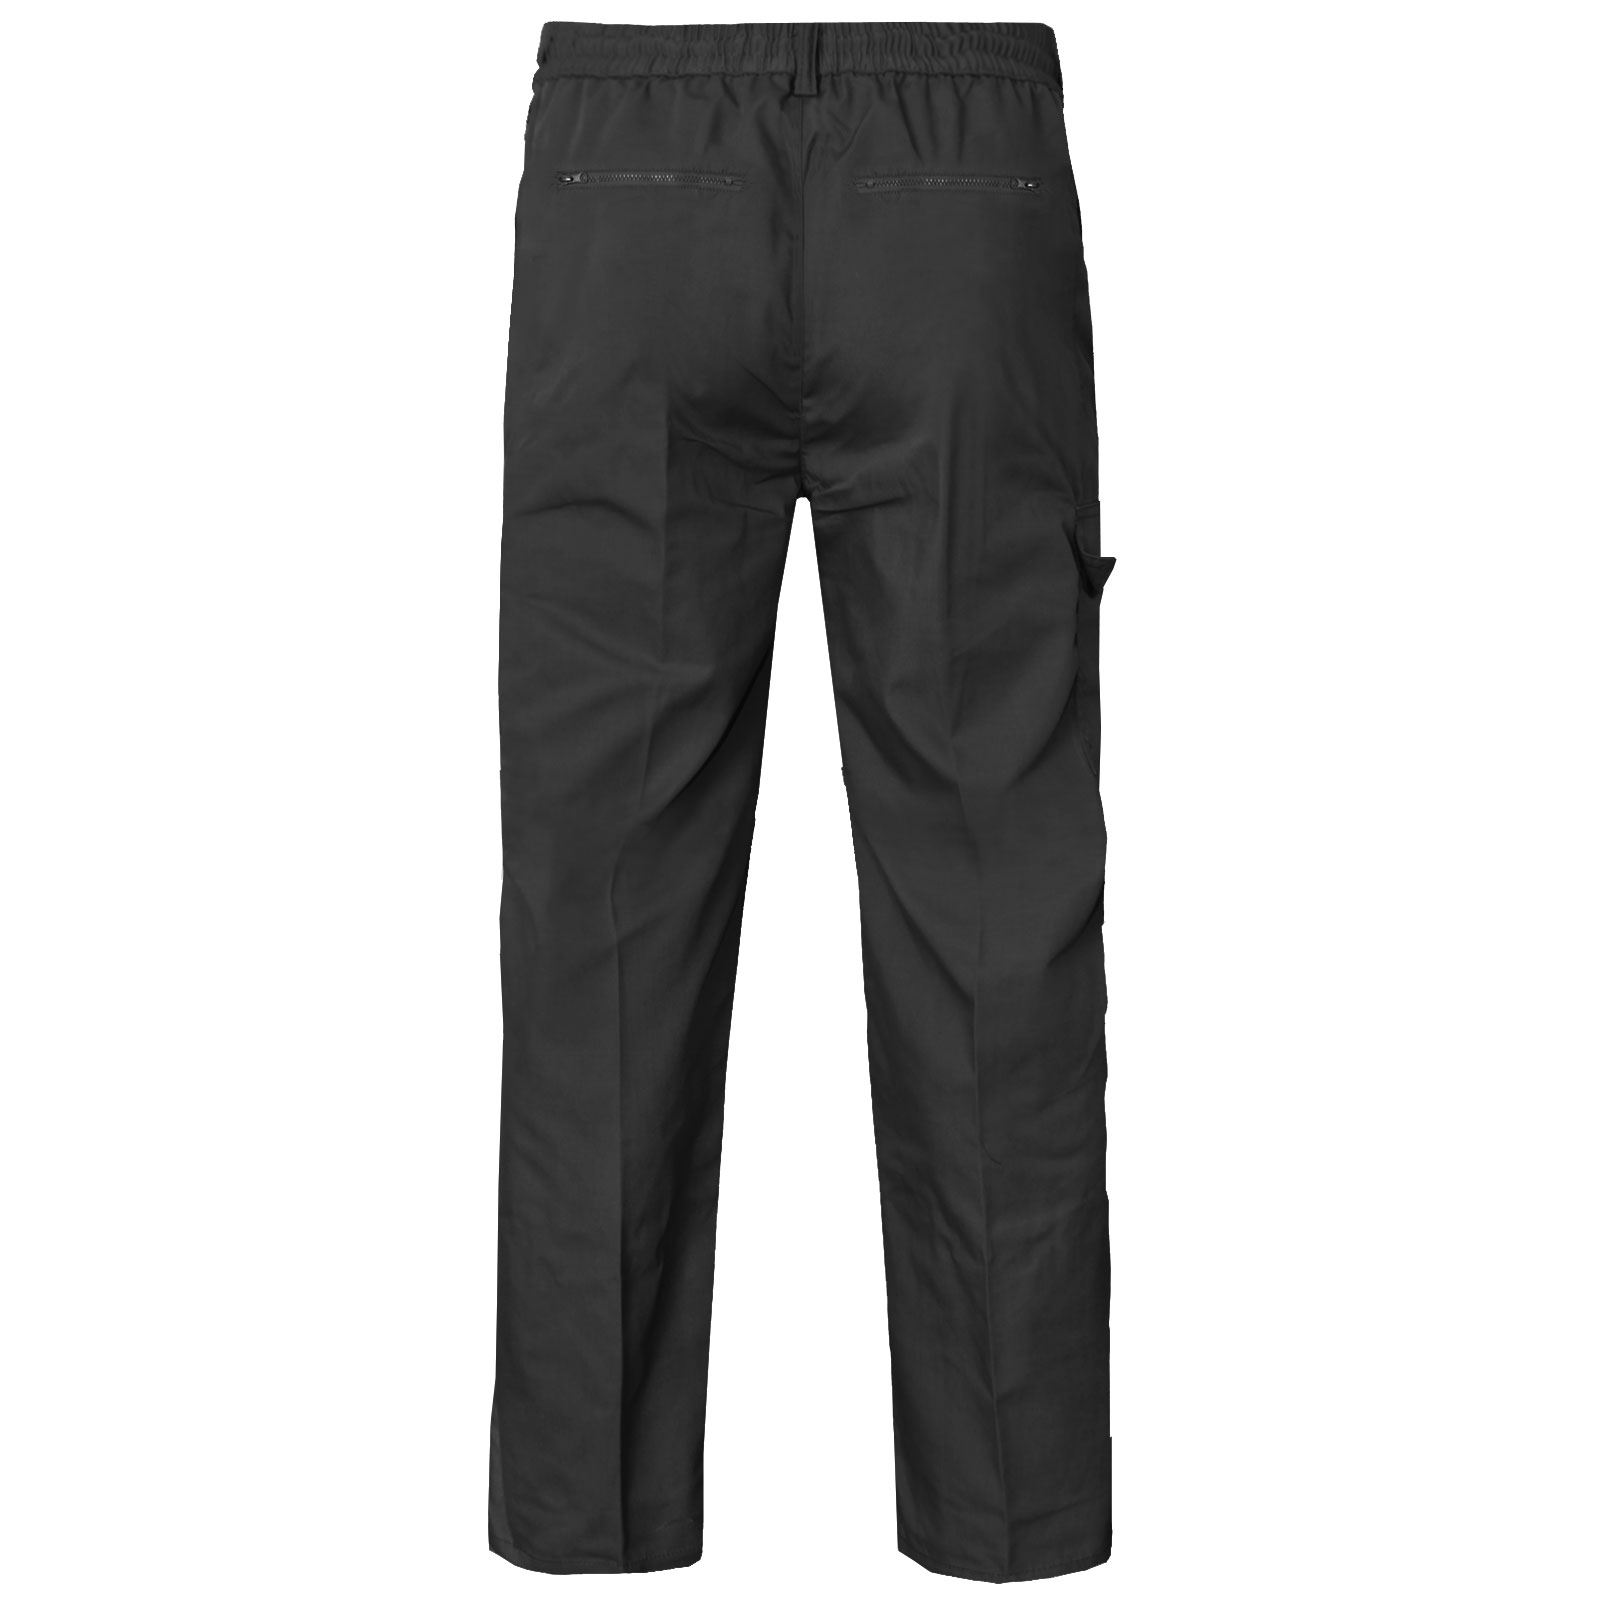 New Mens Elasticated Waist Rugby Trousers Cargo Combat M 3XL